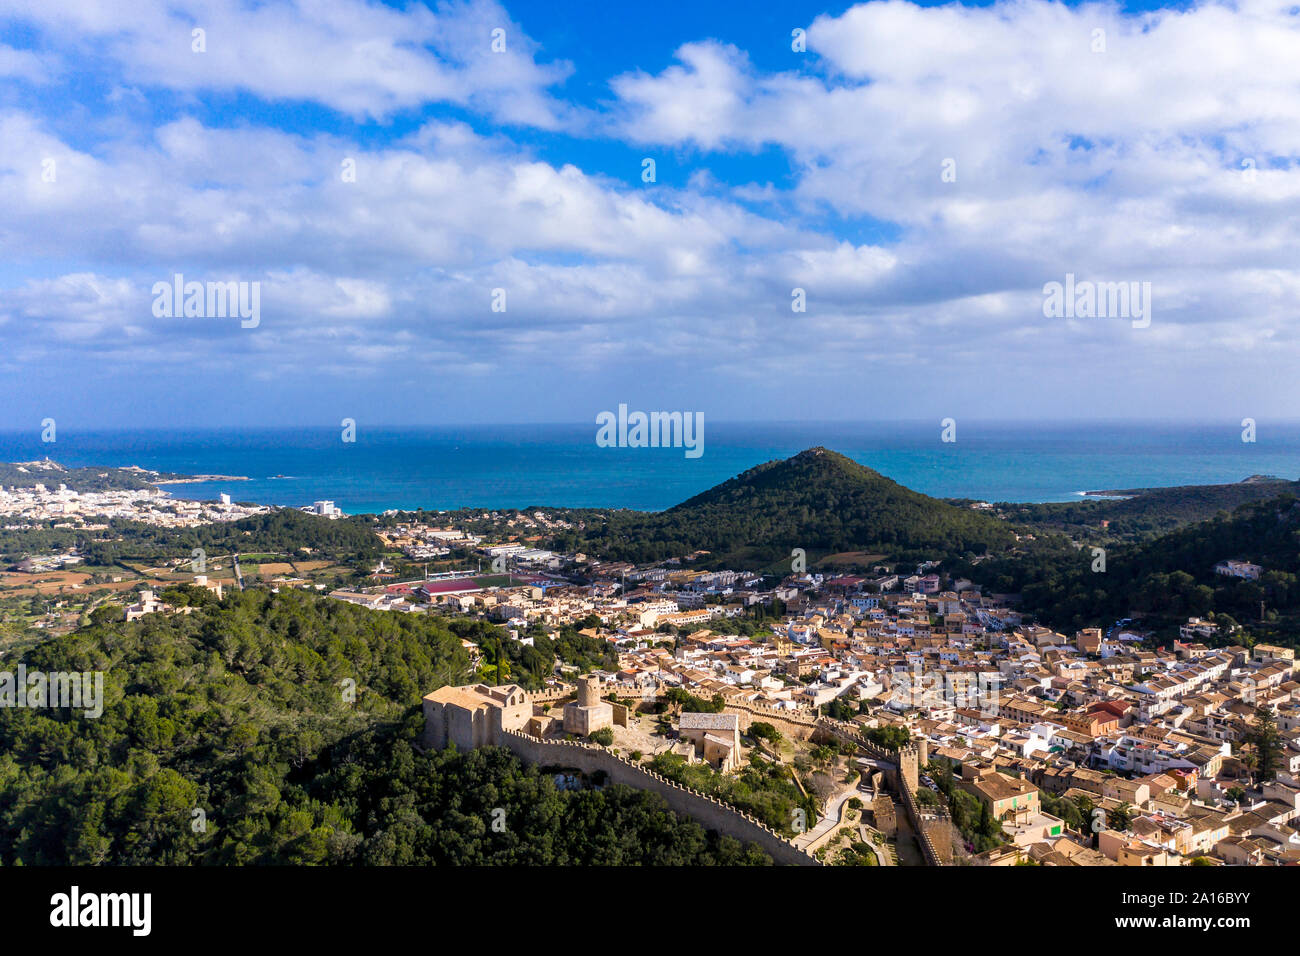 Aerial view of Castle Of Capdepera by Mediterranean Sea against cloudy sky Stock Photo